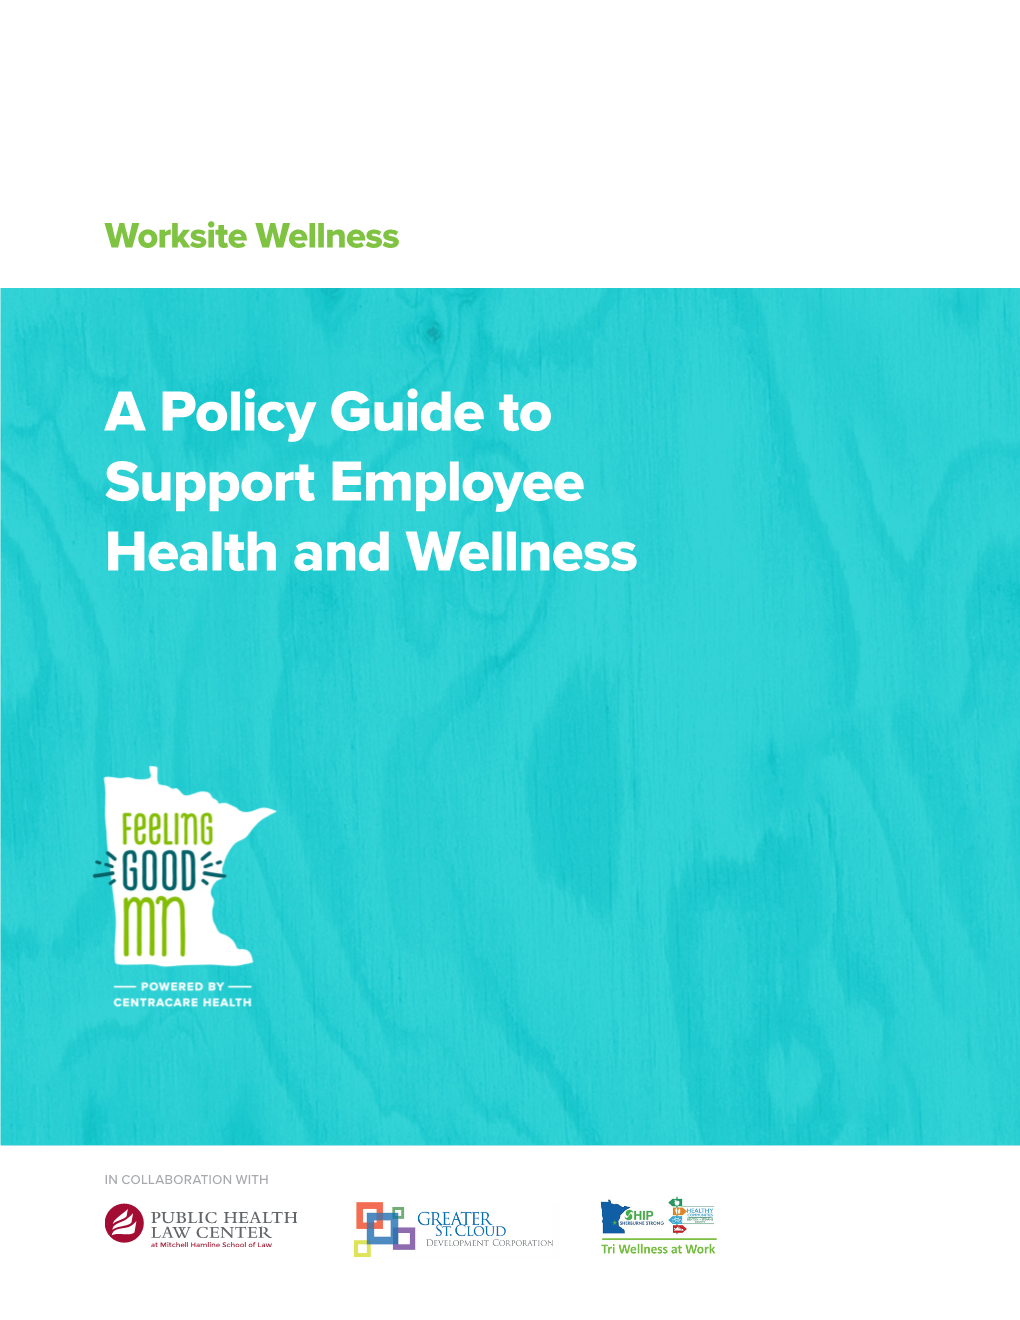 A Policy Guide to Support Employee Health and Wellness